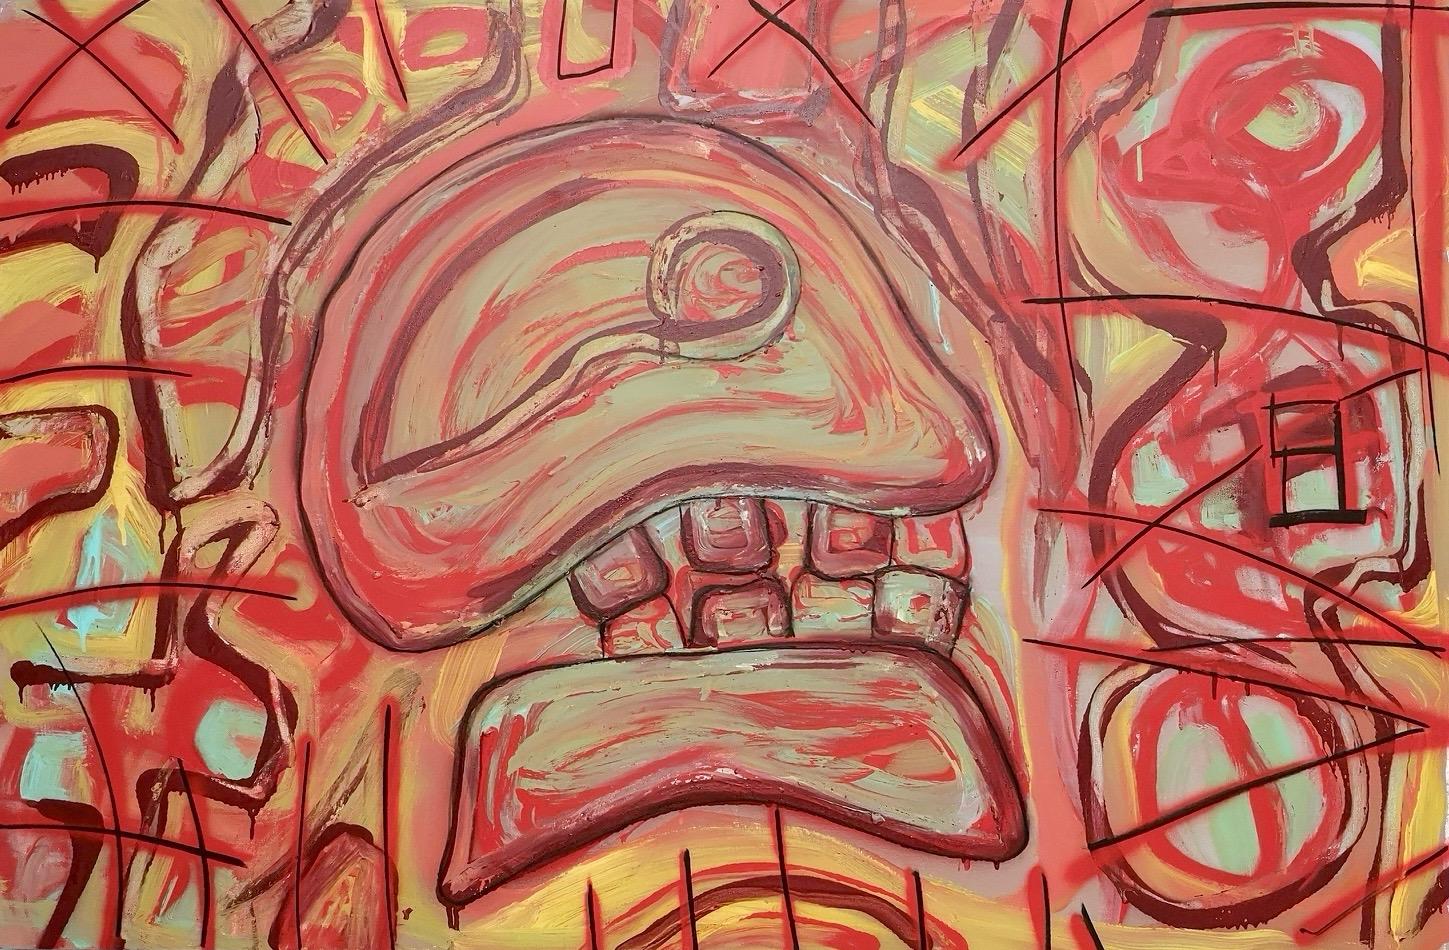 "Teschio Rosso" by Enzio Wenk, 2019 - Acrylic on Canvas, Neo-Expressionism